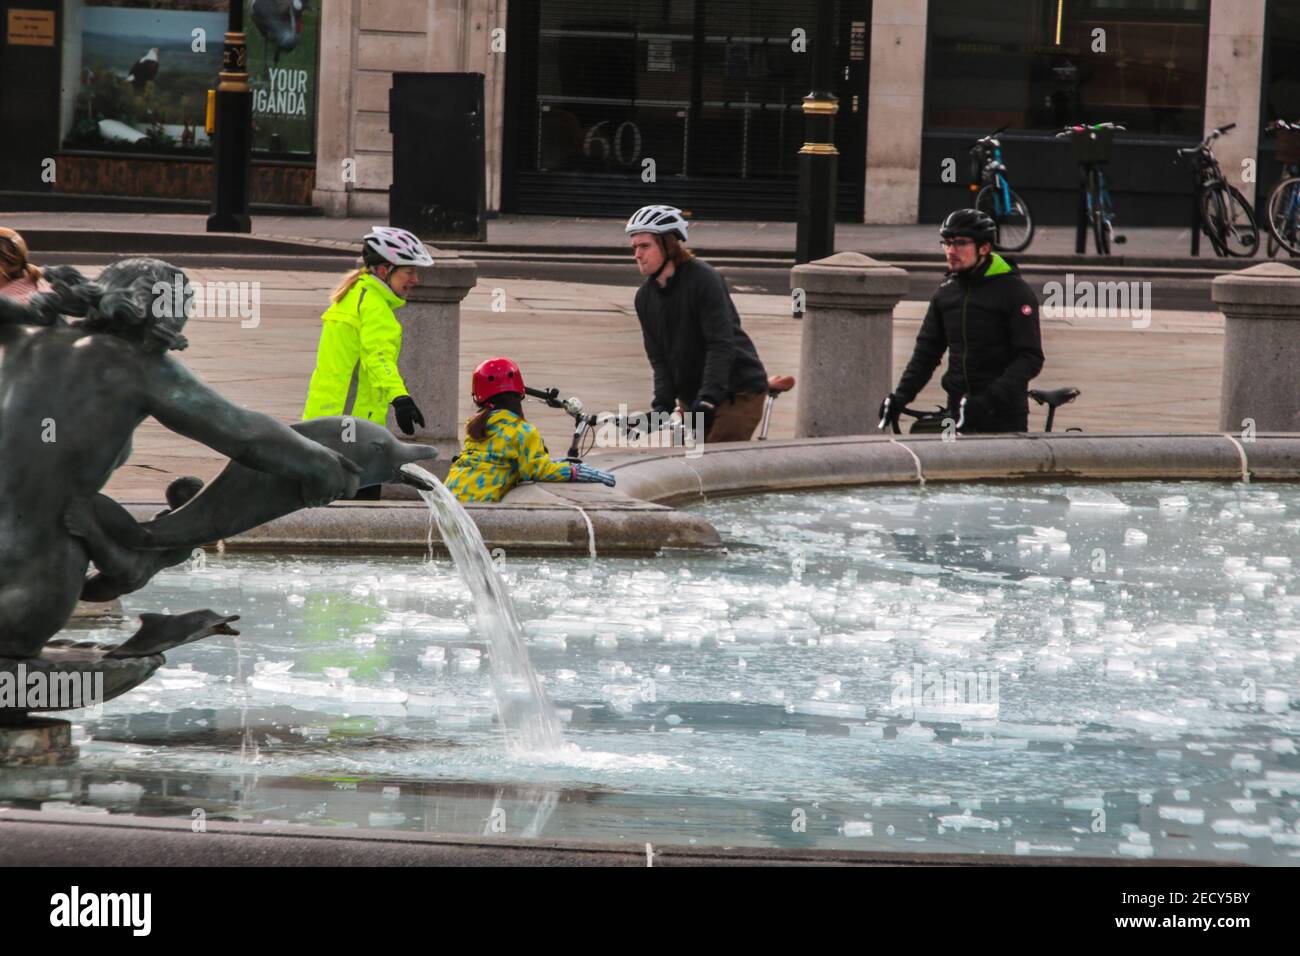 London UK 14 February 2021 People and families enjoying the frozen fountains in Trafalgar Square, were even the water was frozen today. Paul Quezada-Neiman/Alamy Live News Stock Photo